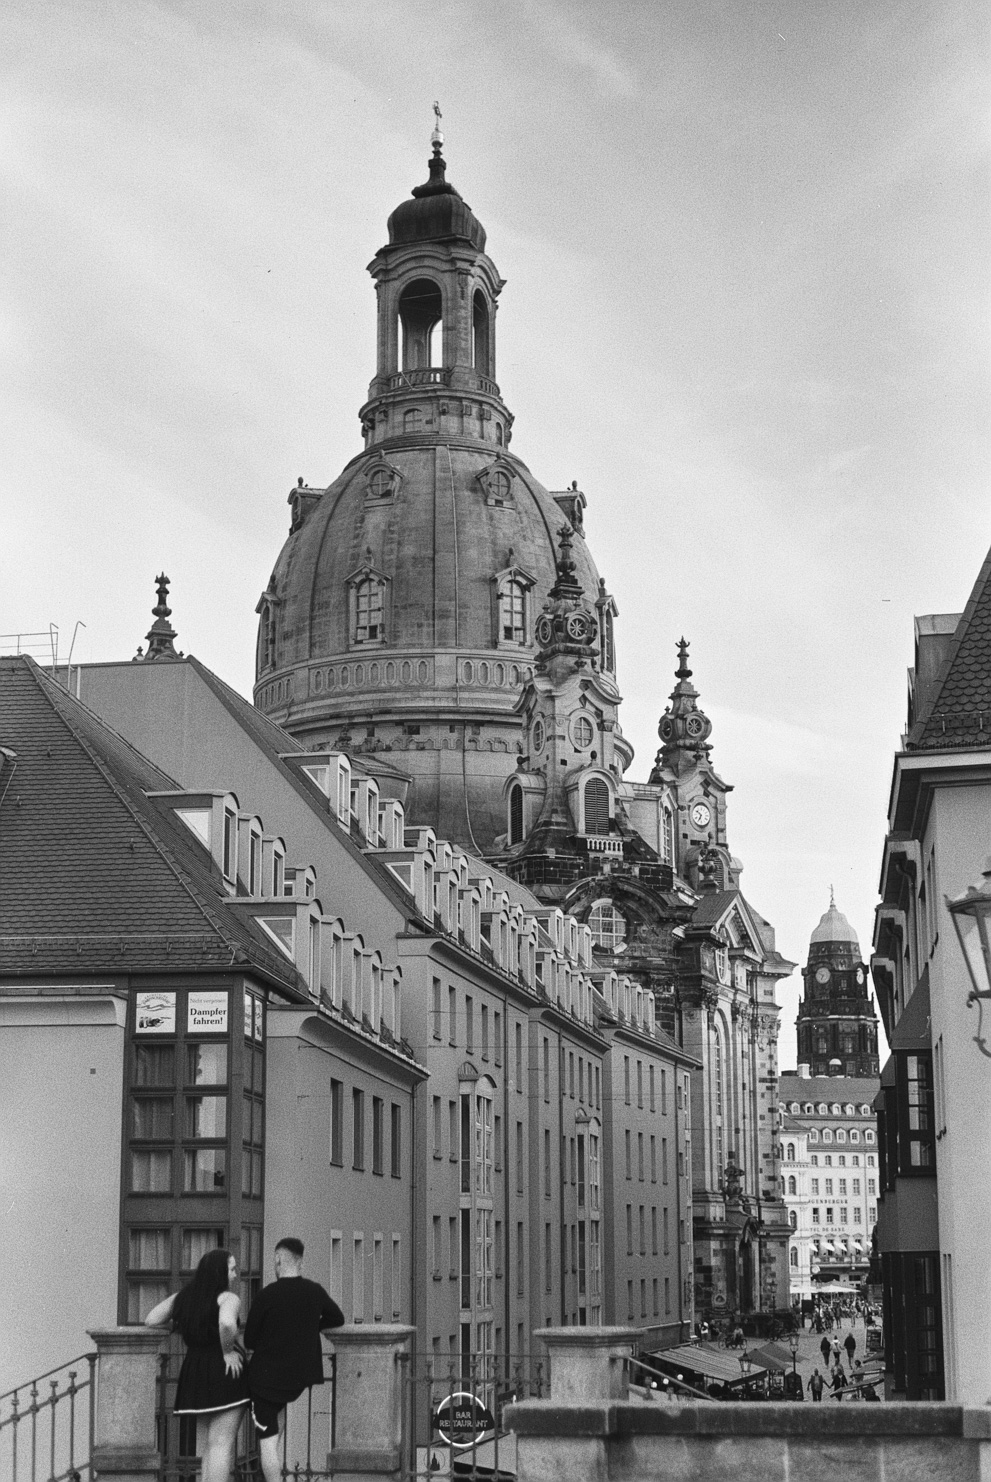 The Church of Our Lady (Frauenkirche) as seen from Bruhl's terrace (Brühl'sche Terrasse). Shot on Fomapan 200 creative.